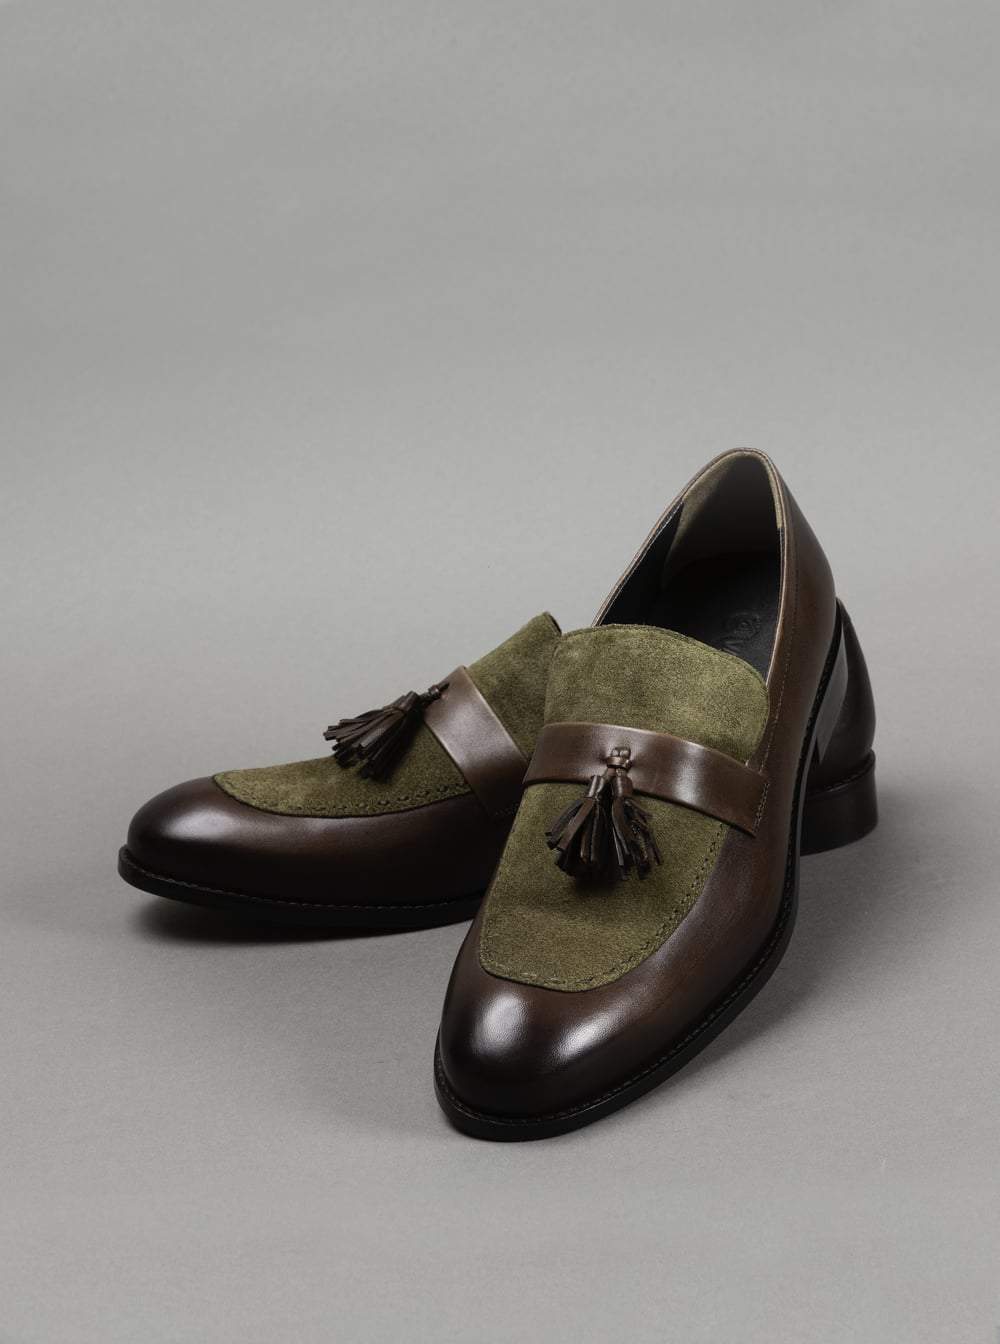 Olive Green And Brown Bespoke Loafer Shoes